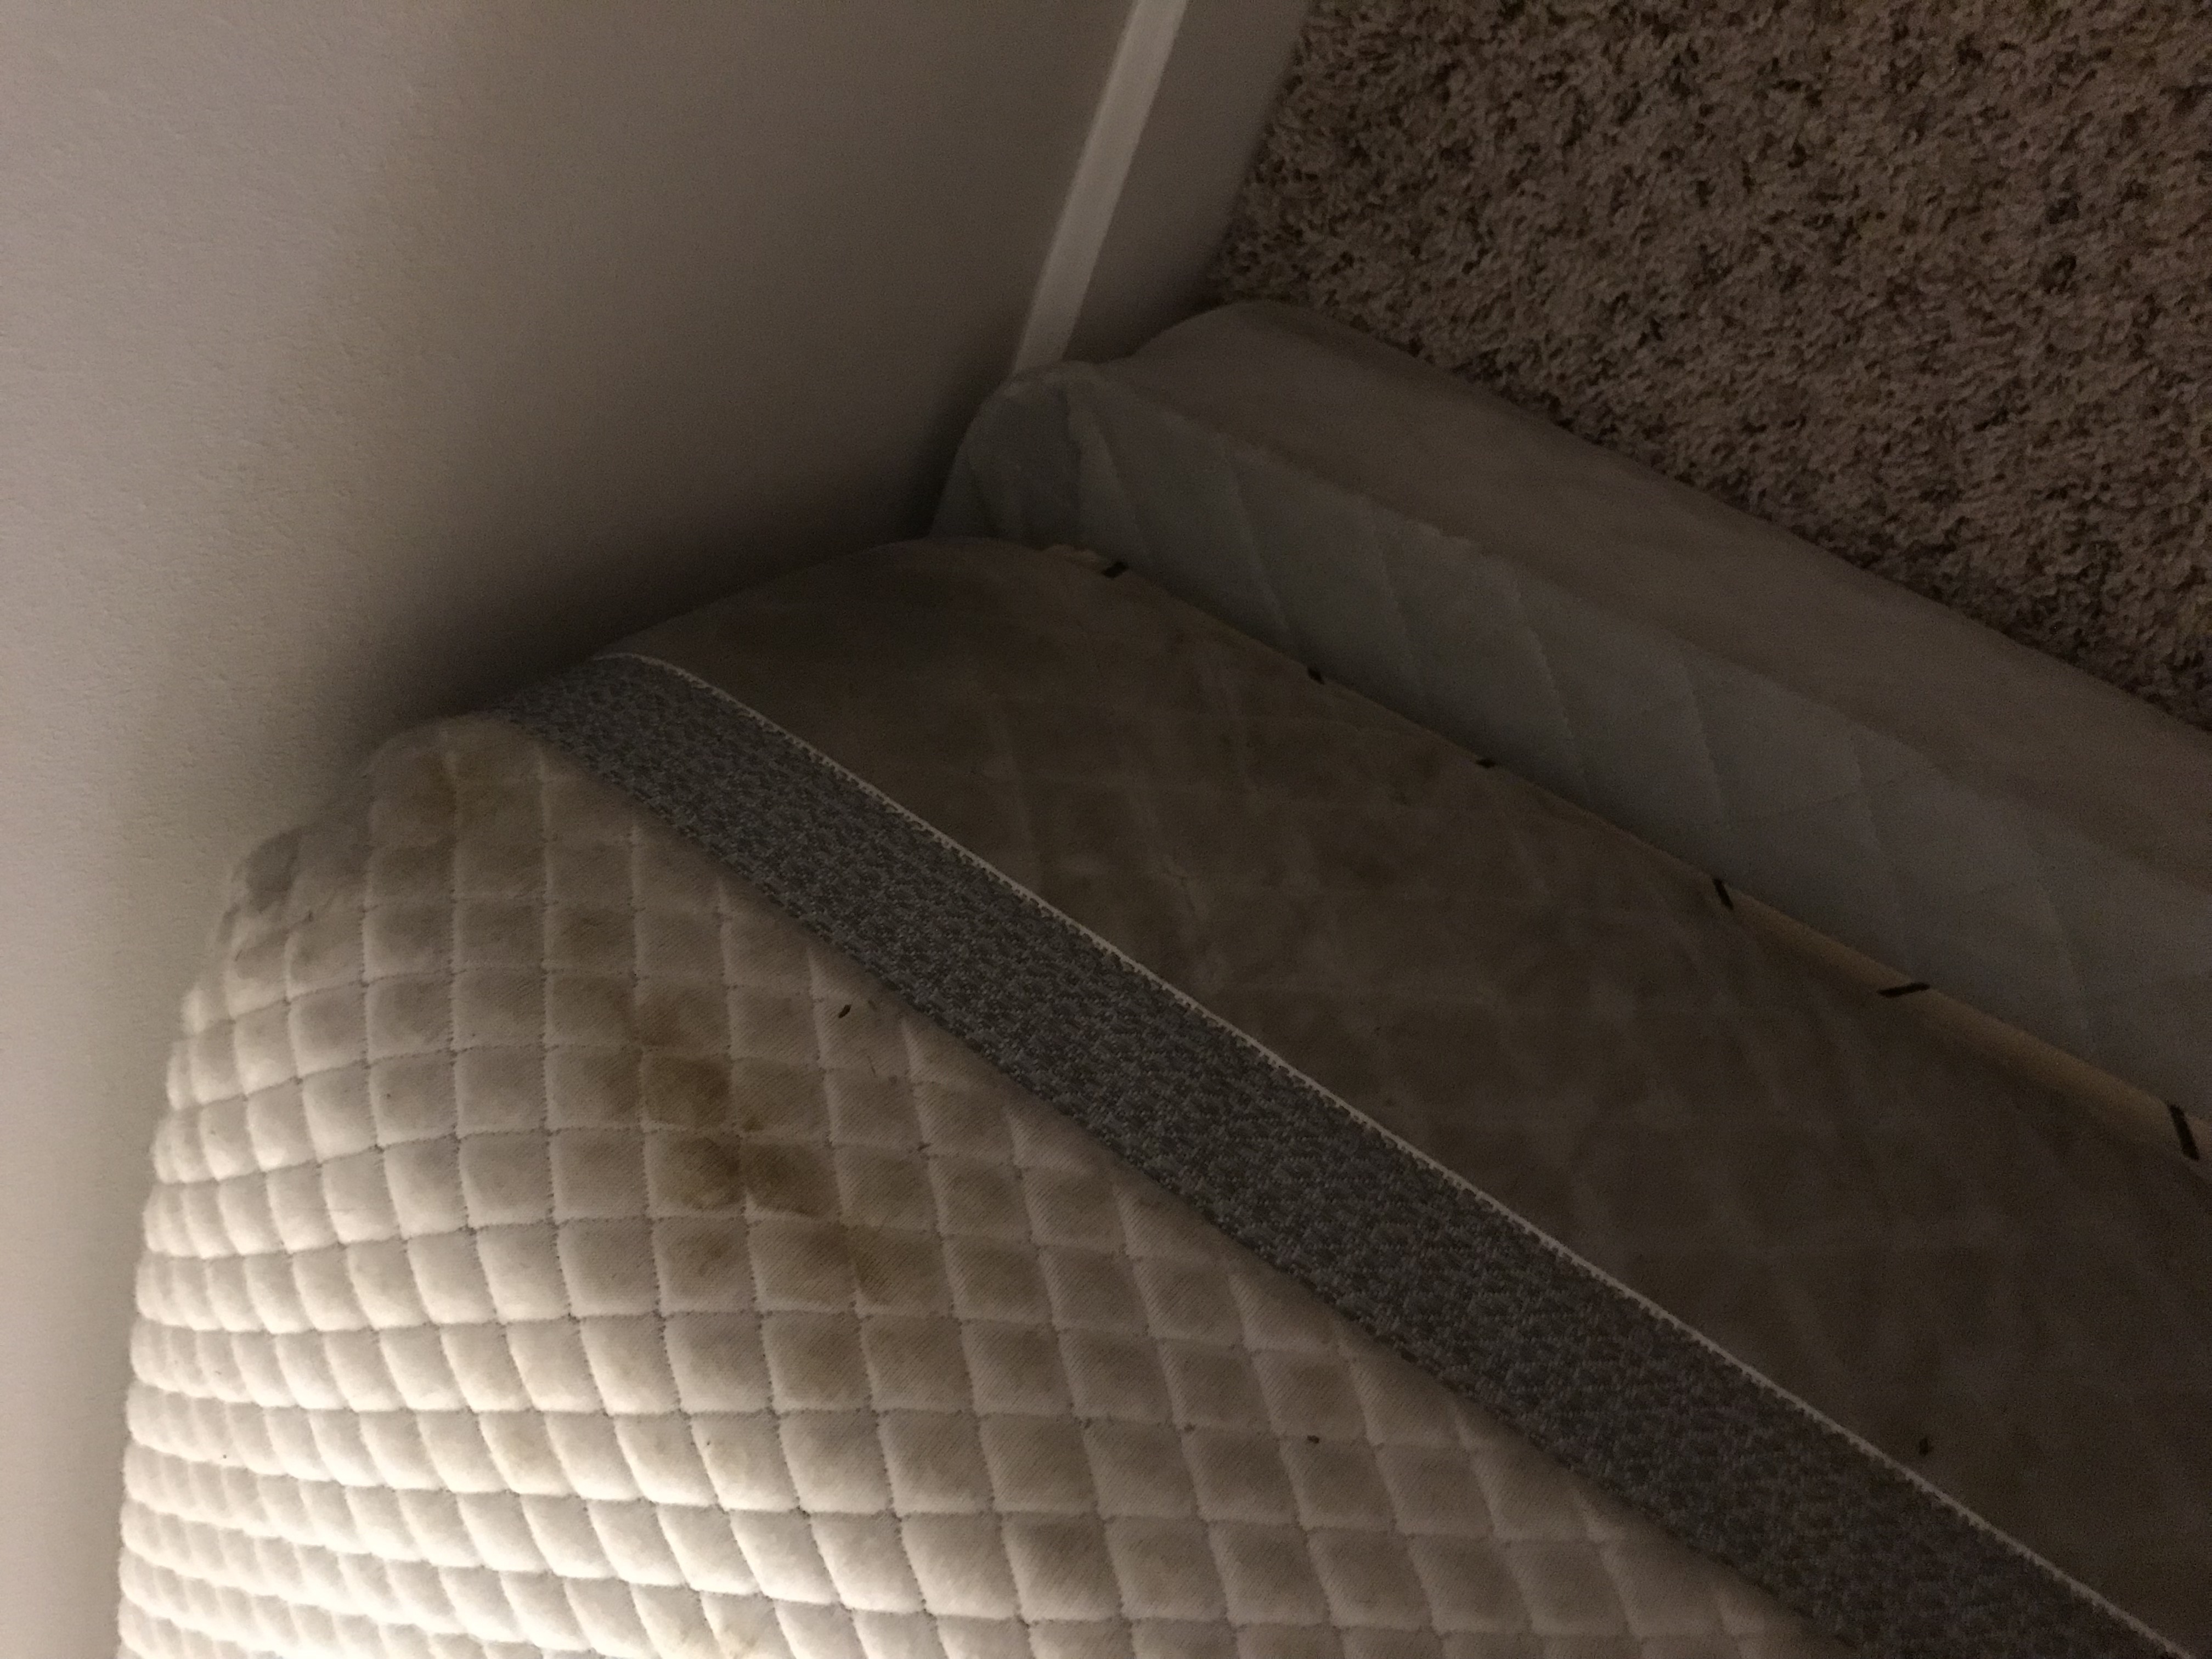 Mattress is filthy everywhere!